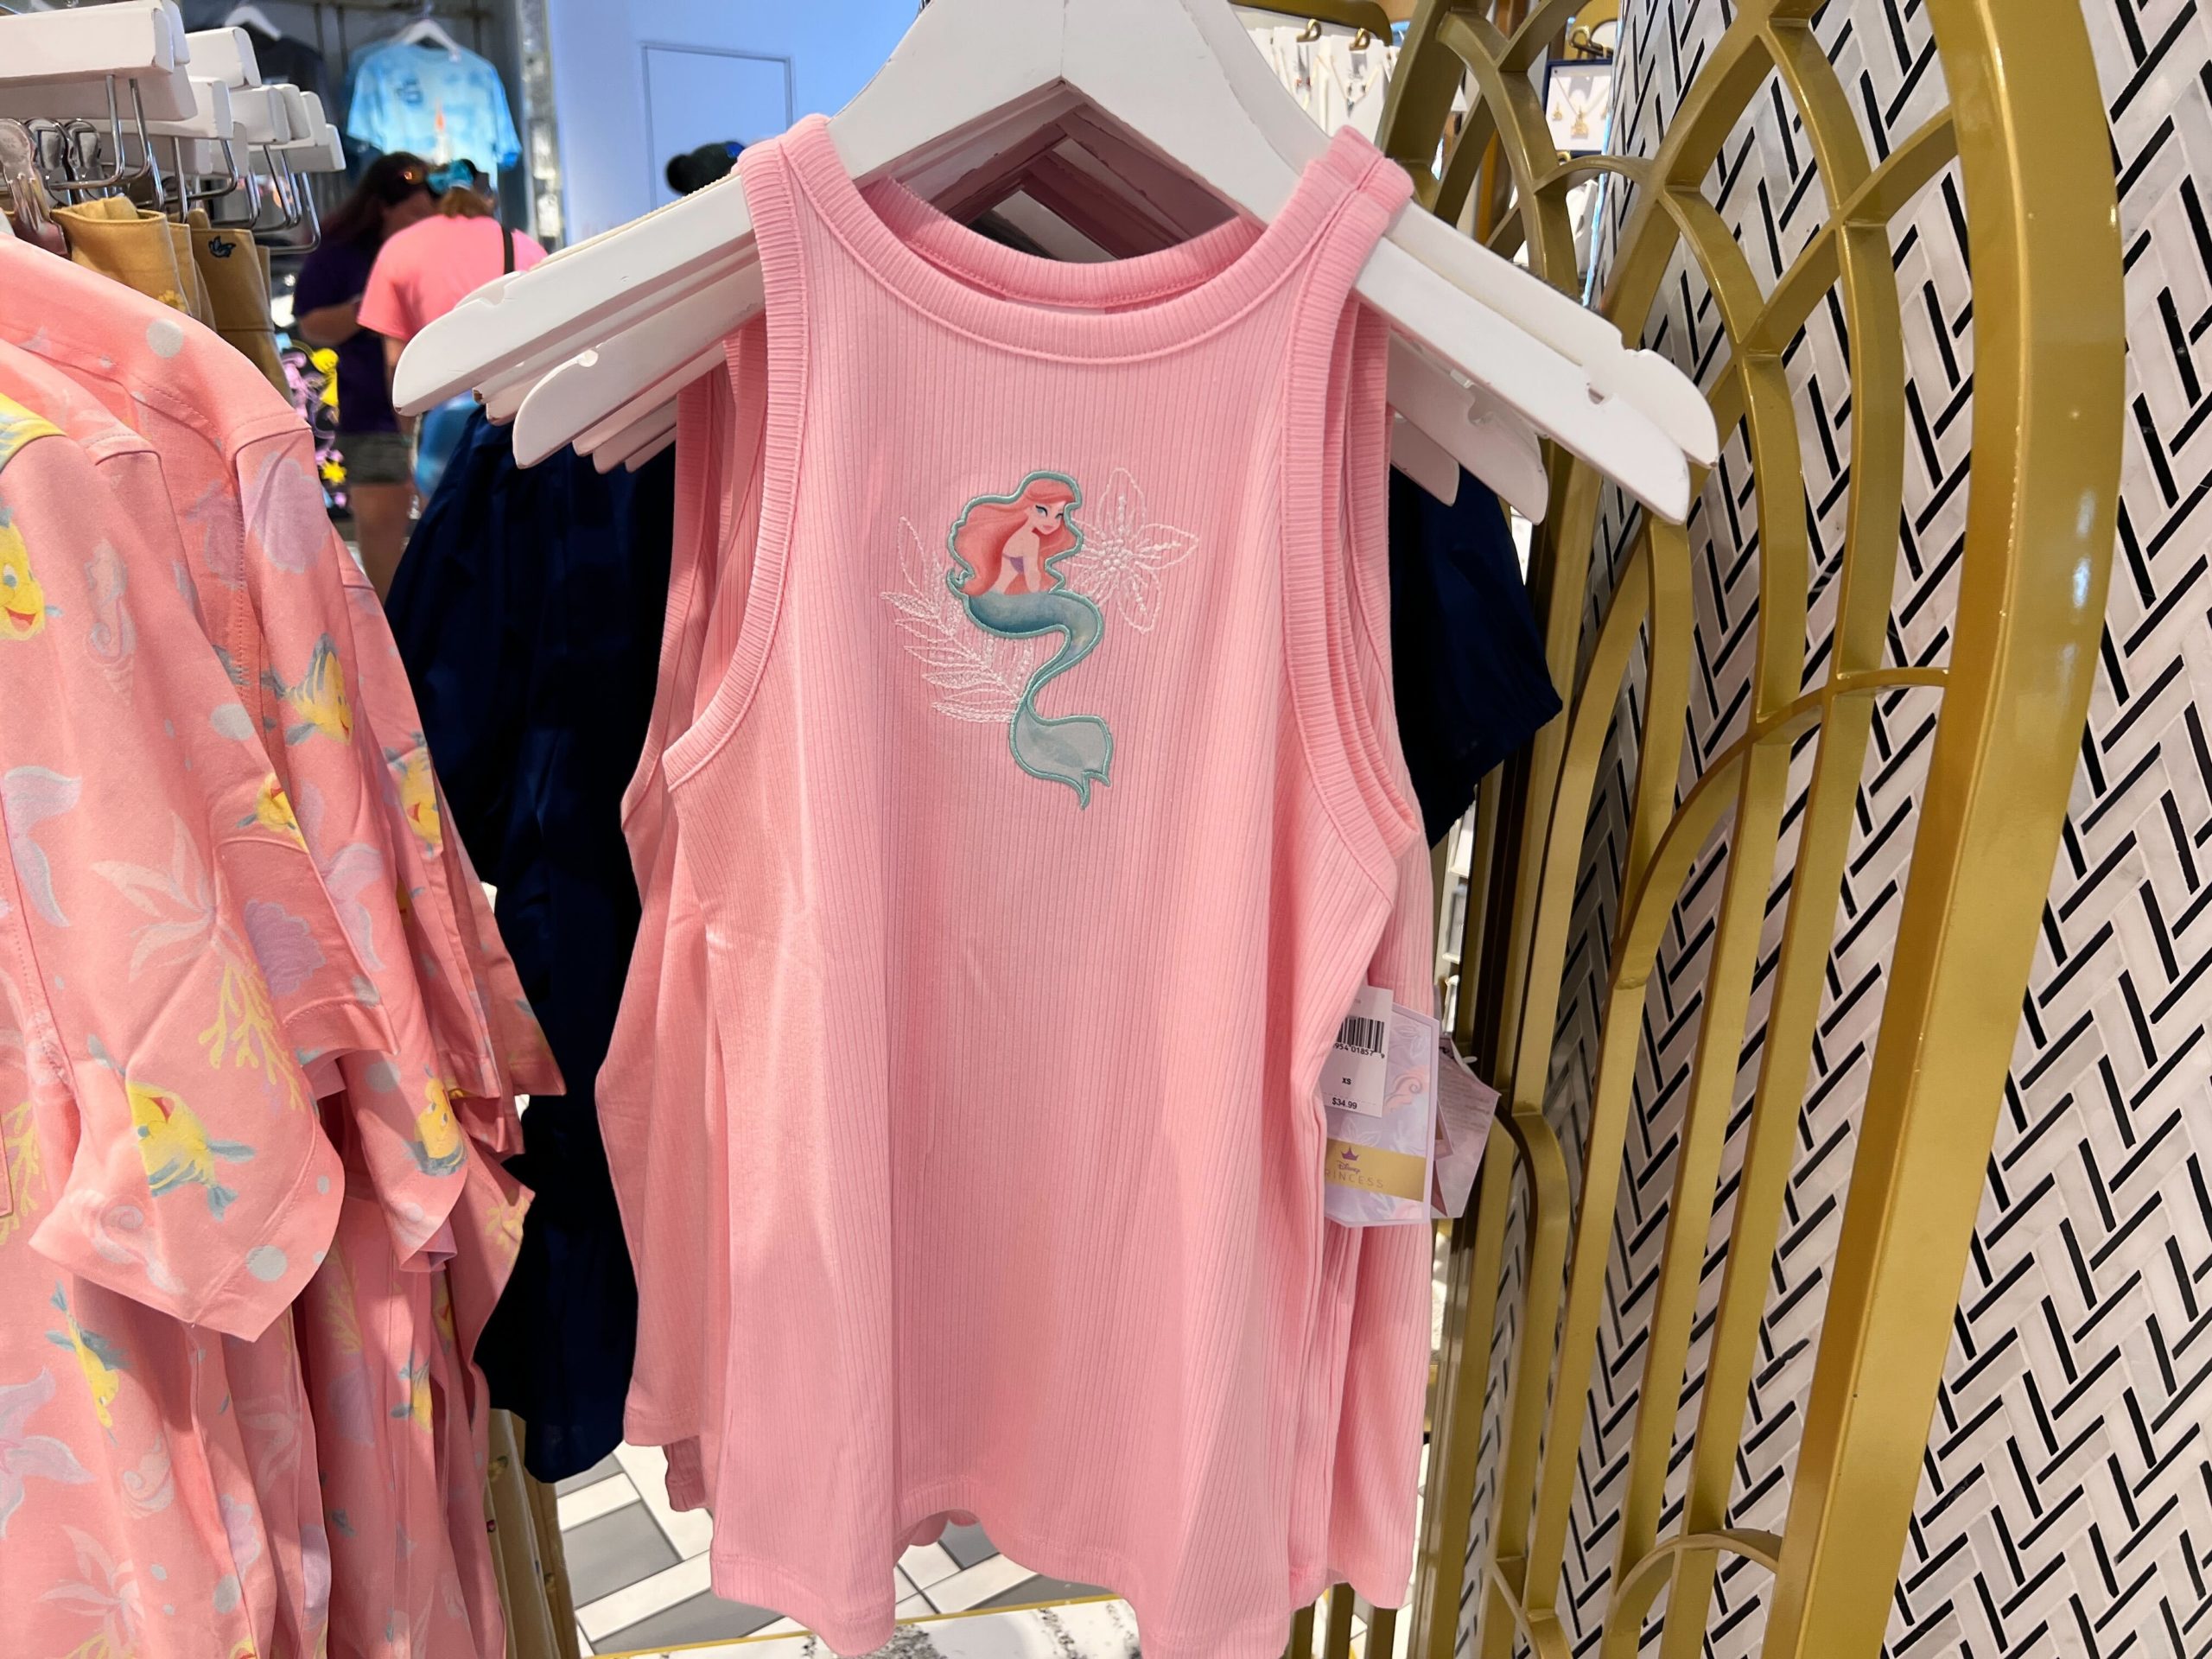 Darling It's Better With 'The Little Mermaid' Shirts